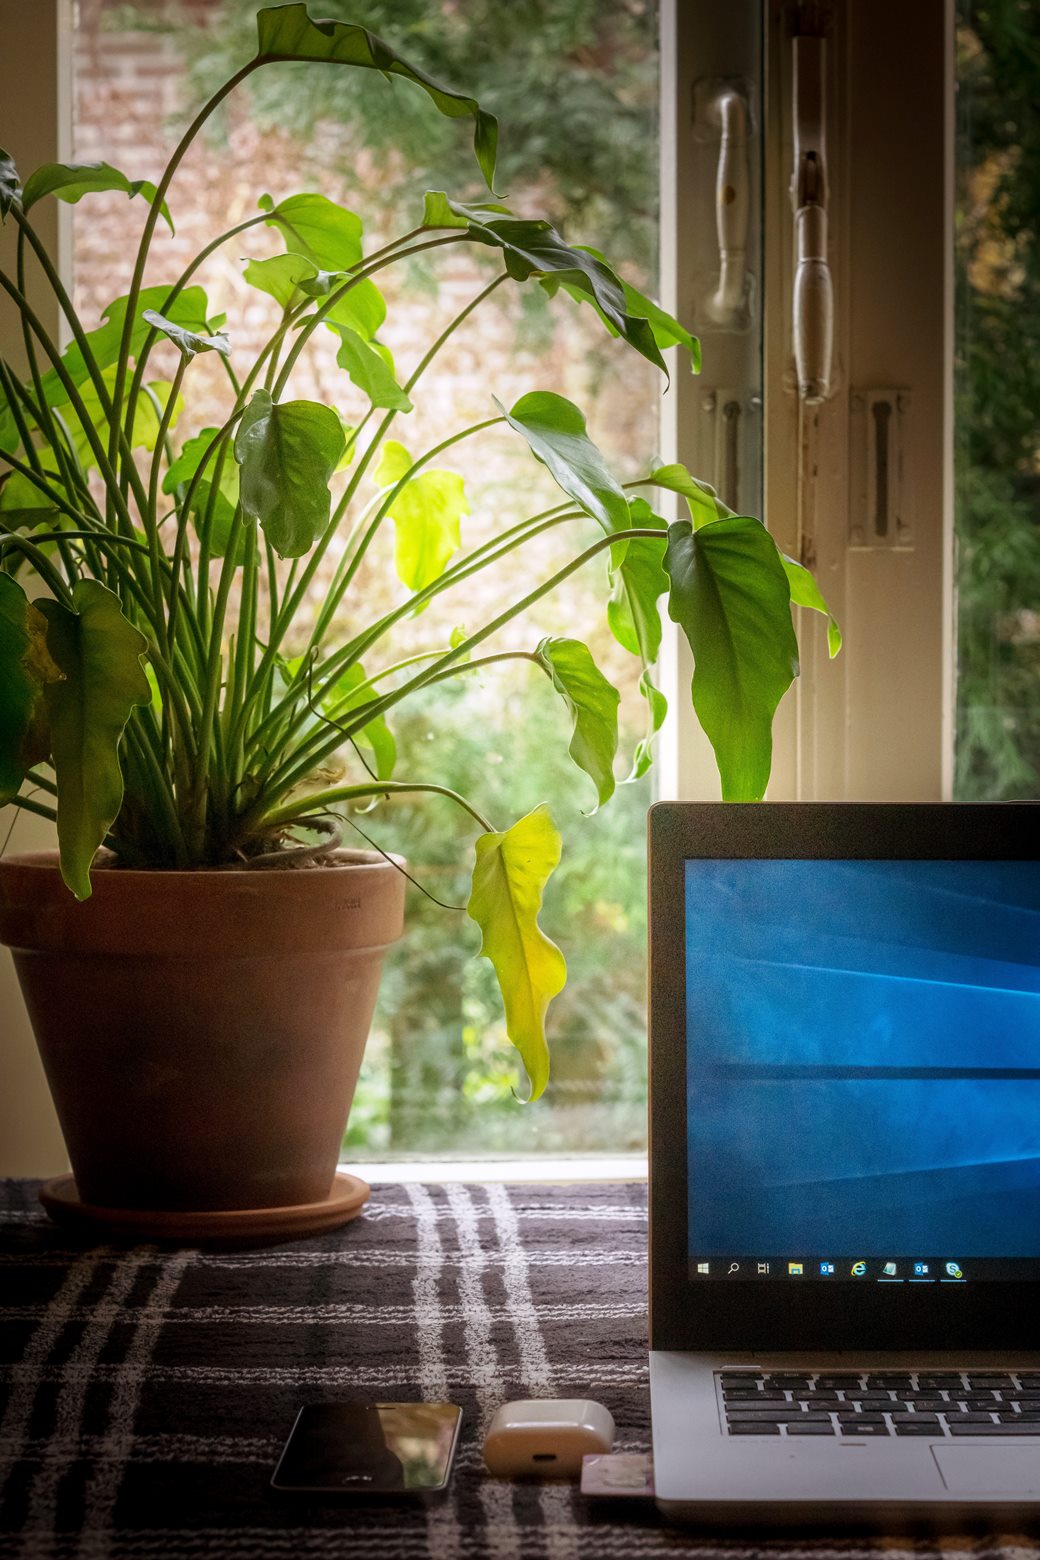 Advantages of working from home in a garden office